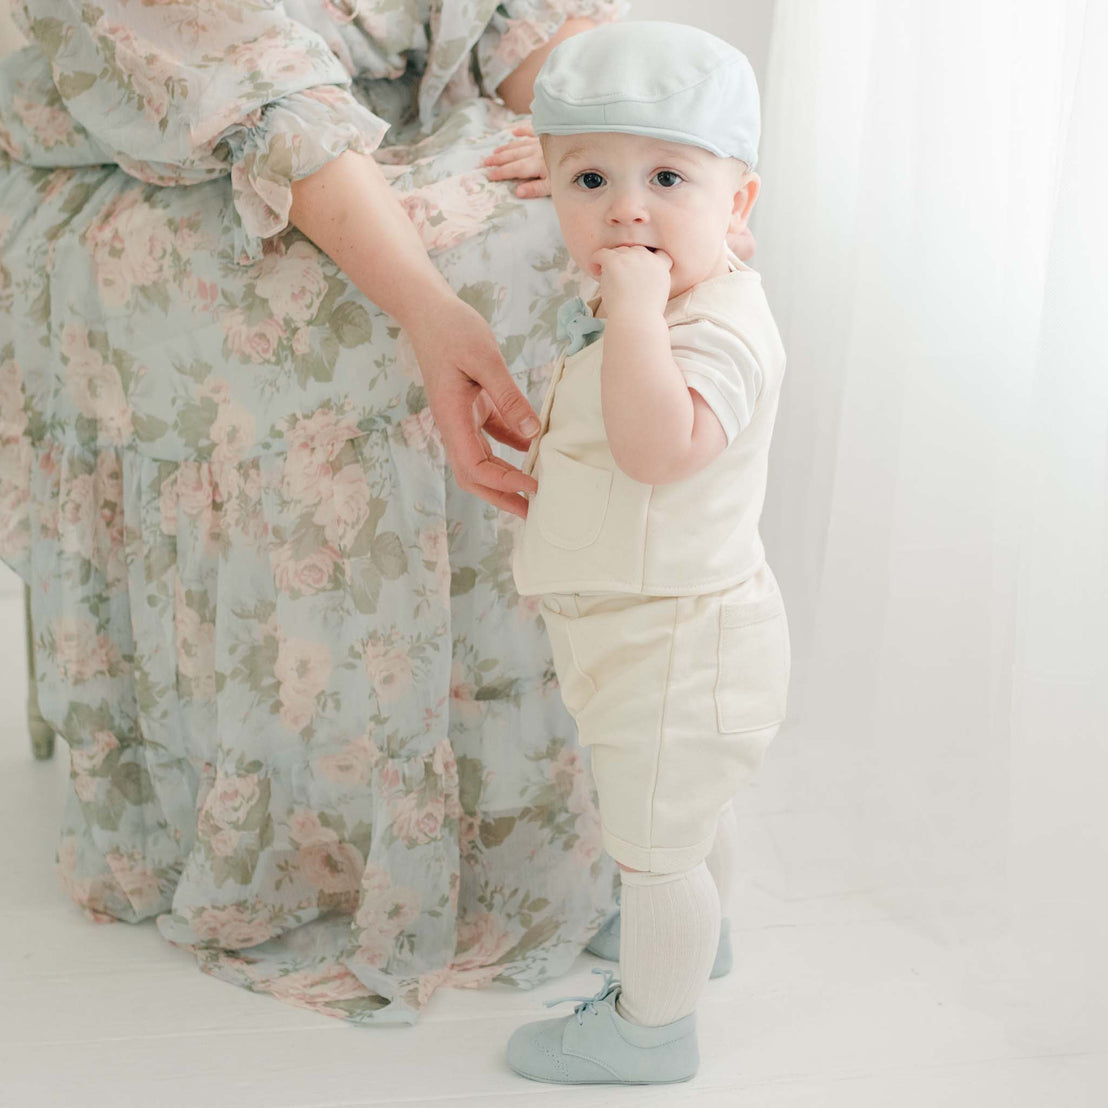 Baby boy standing near his mother. He is wearing a tan vest, tan pants and a powder blue Newsboy Cap, and blue velvet bow tie